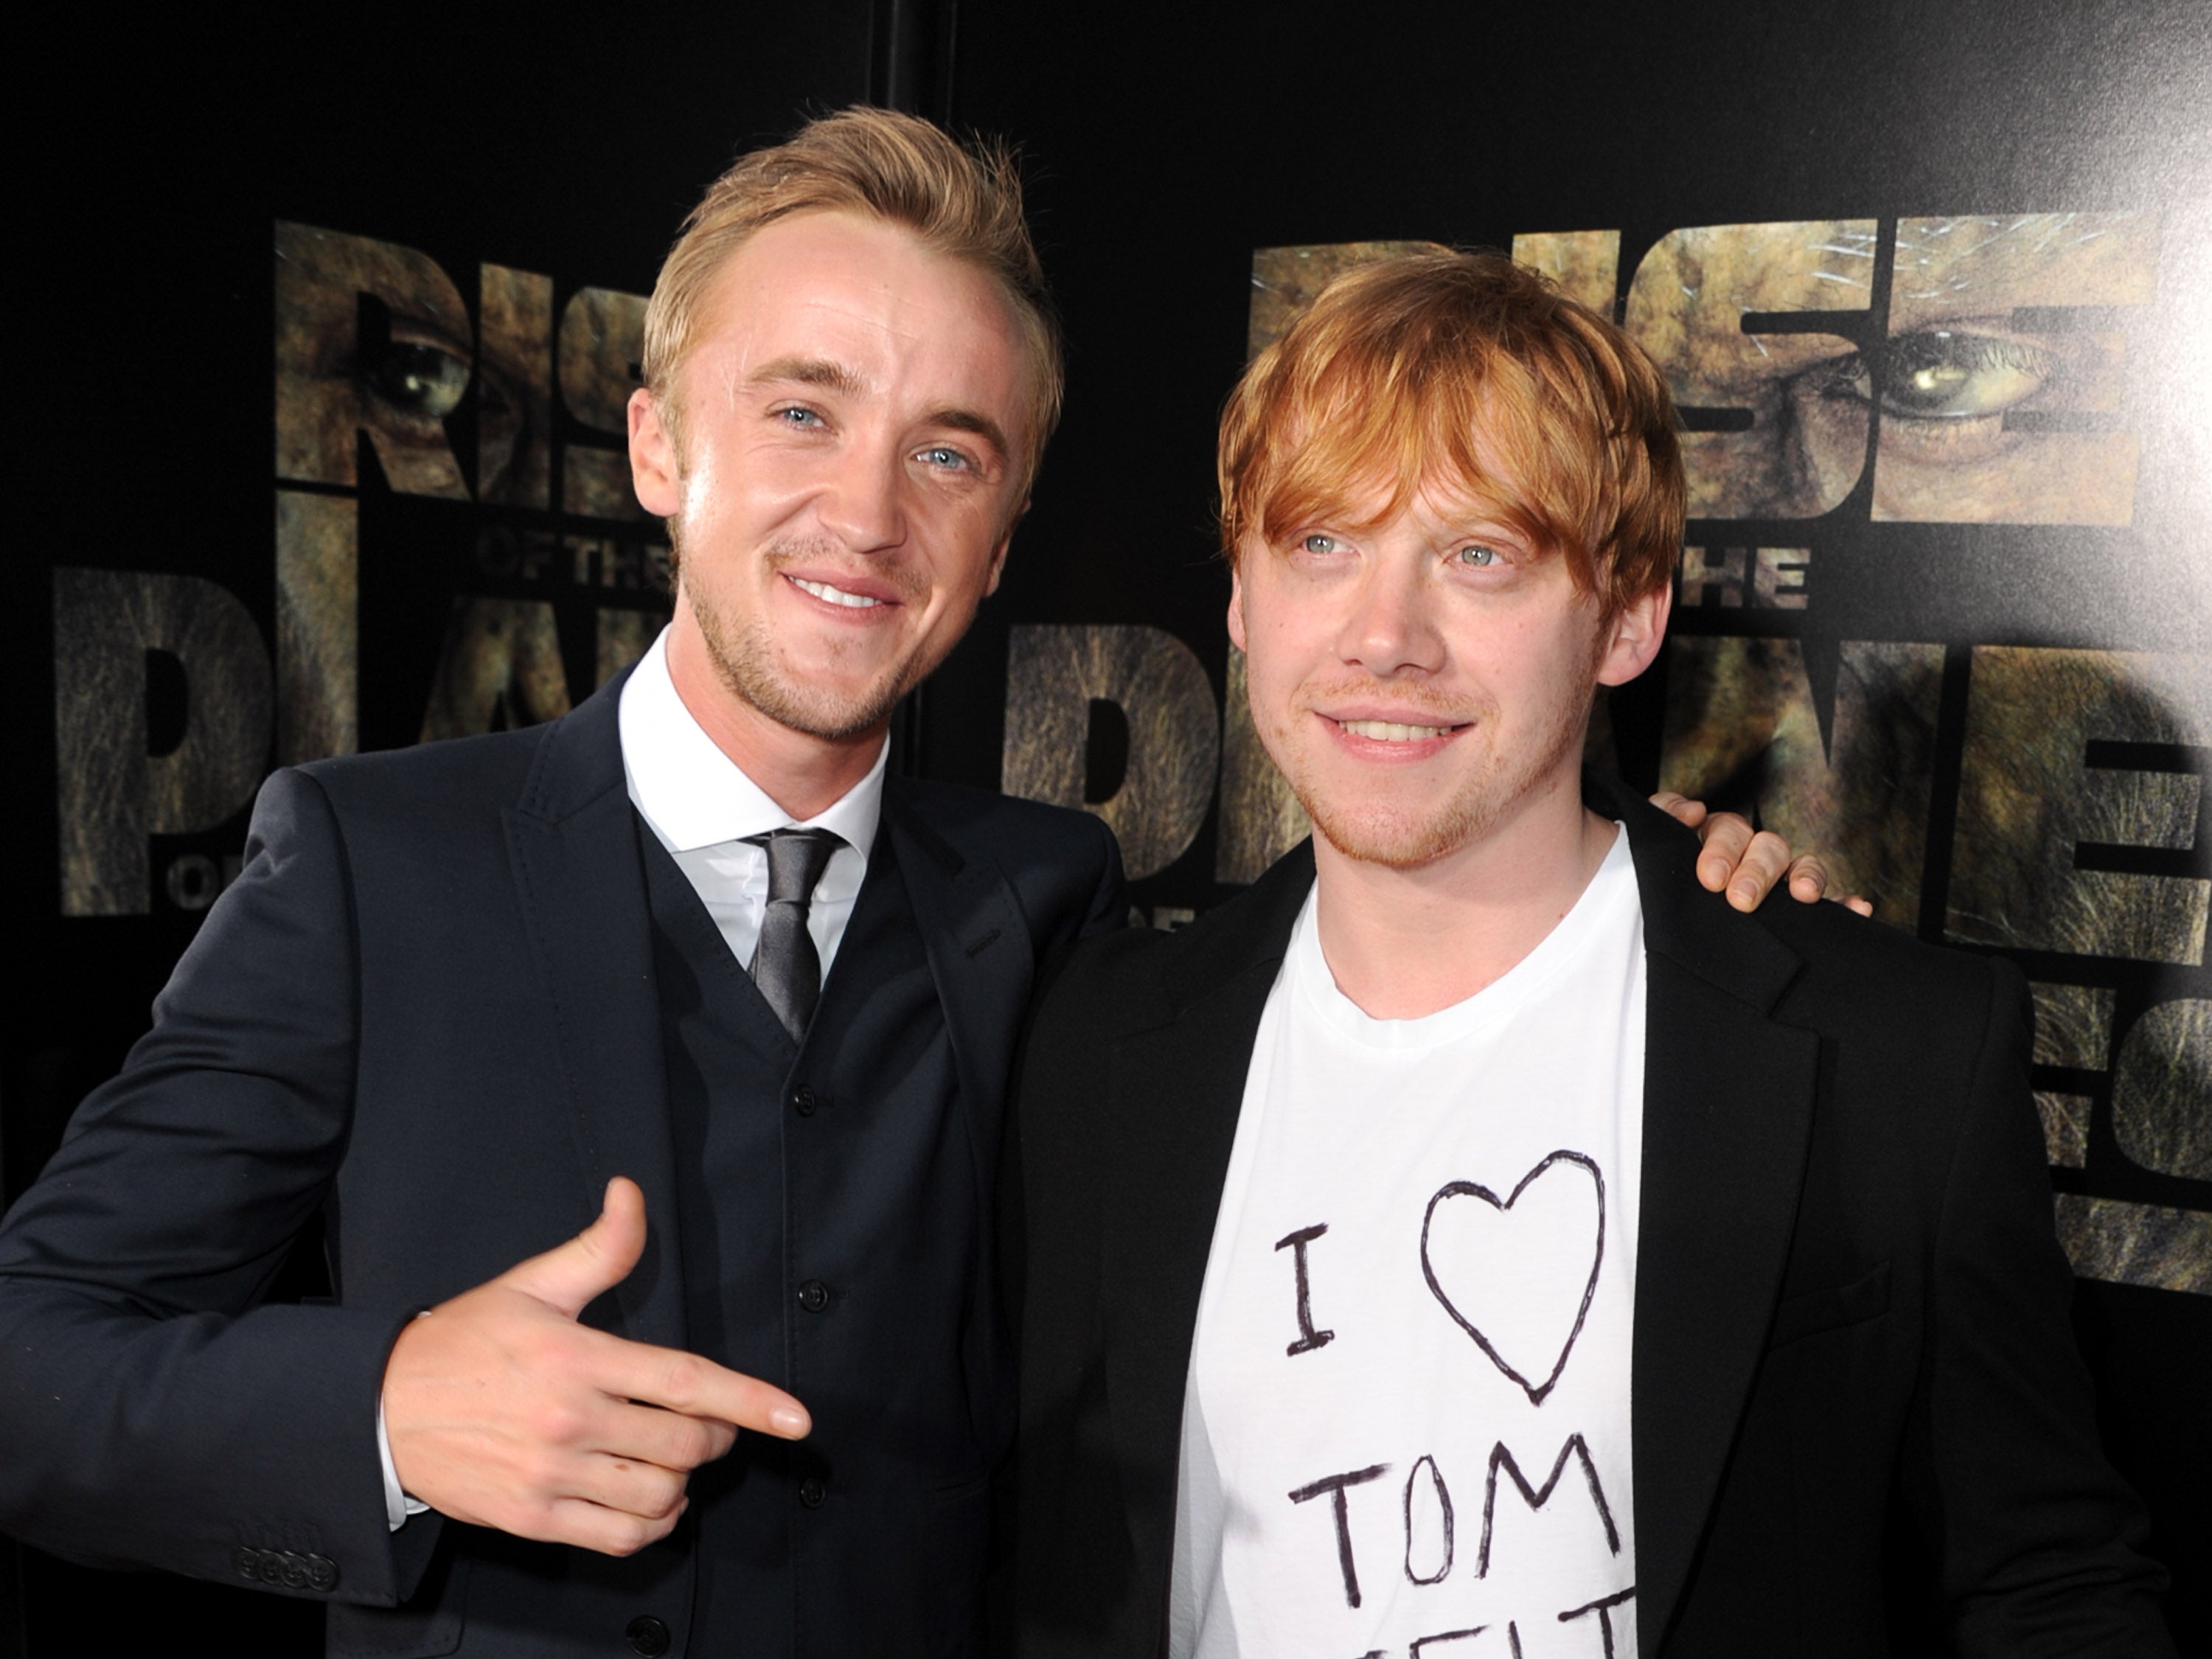 Harry Potter: The child actor who nearly played Ron Weasley but